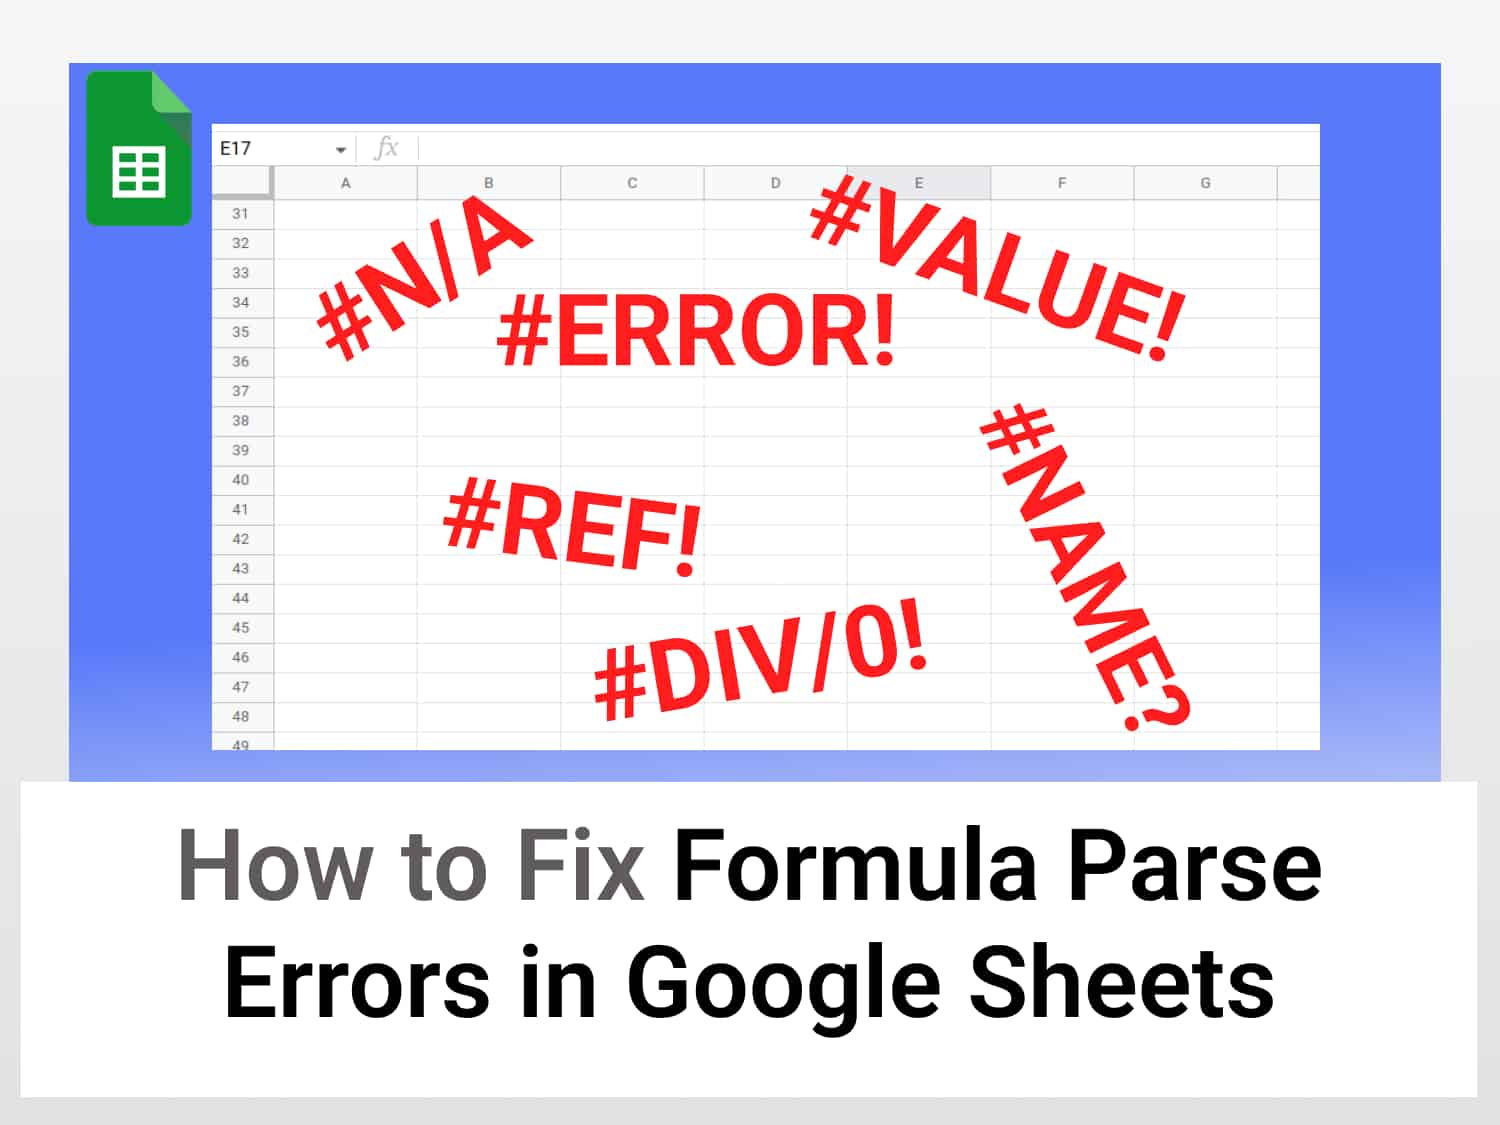 How to fix formula parse errors in Google Sheets